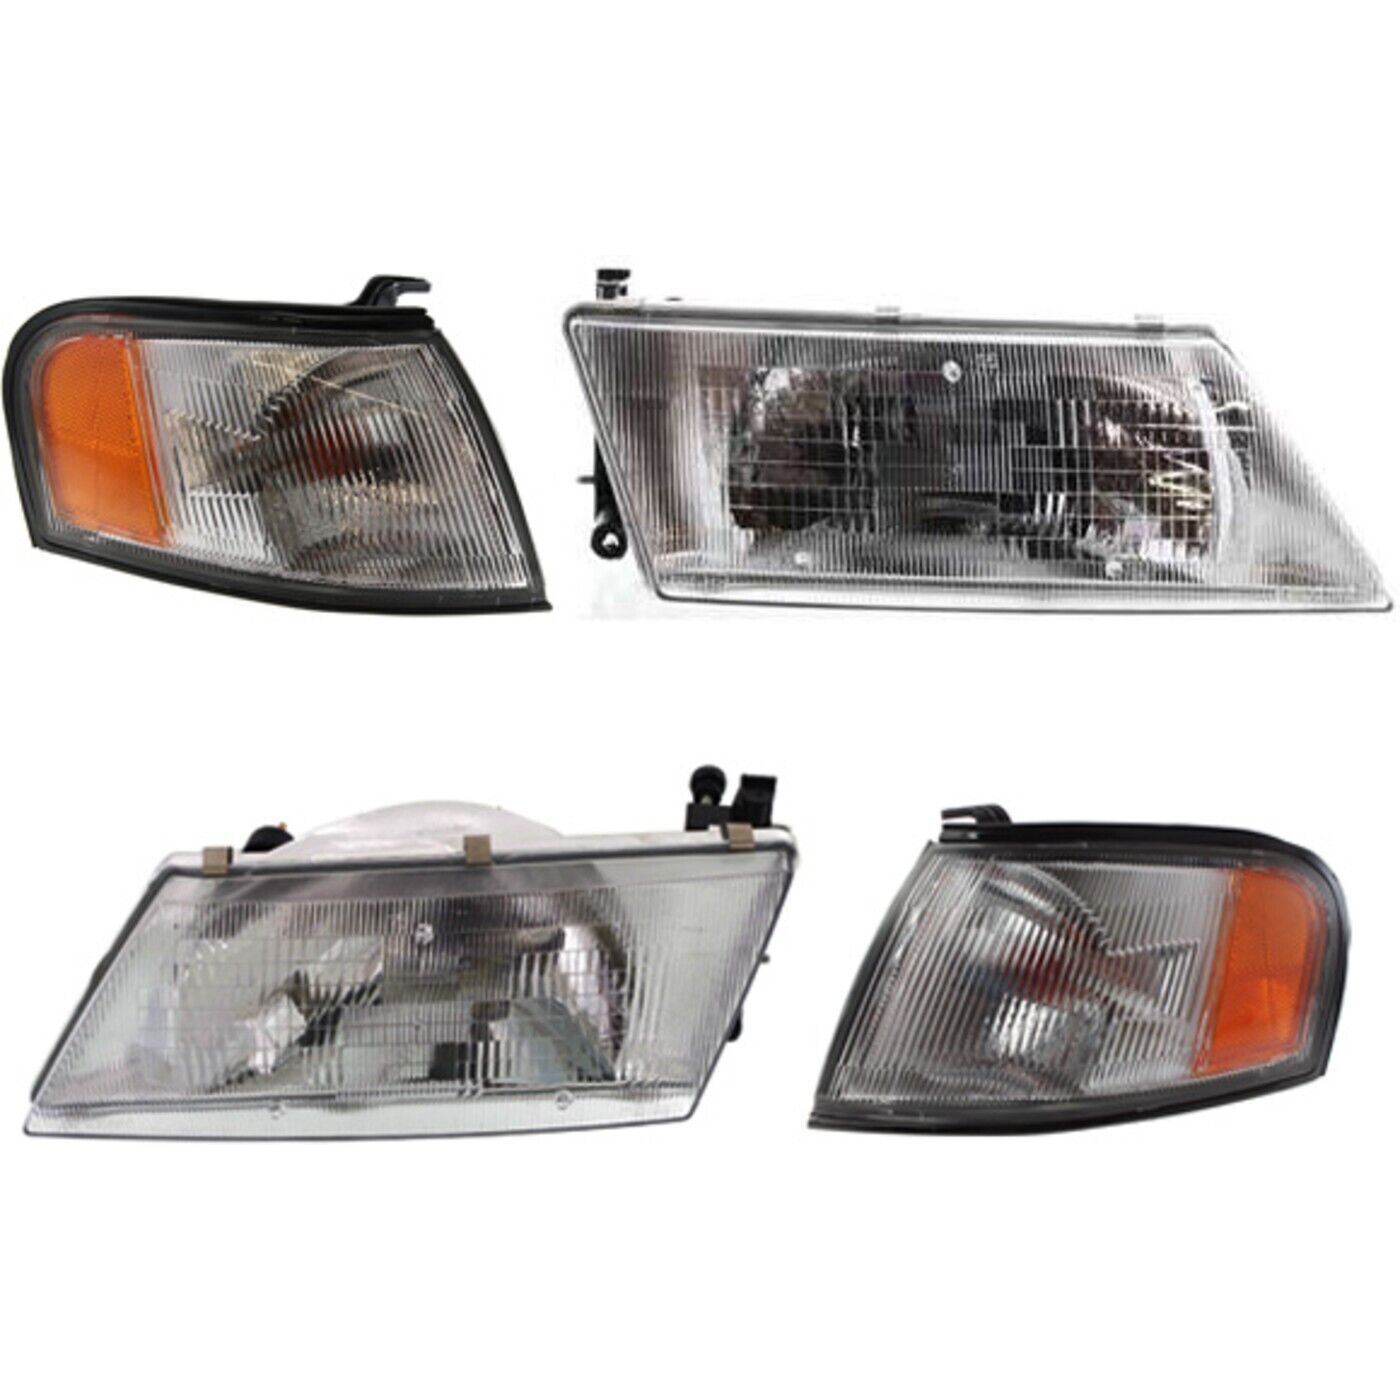 Headlight Kit For 95-98 Nissan Sentra 95-97 200SX With Corner Light LH and RH